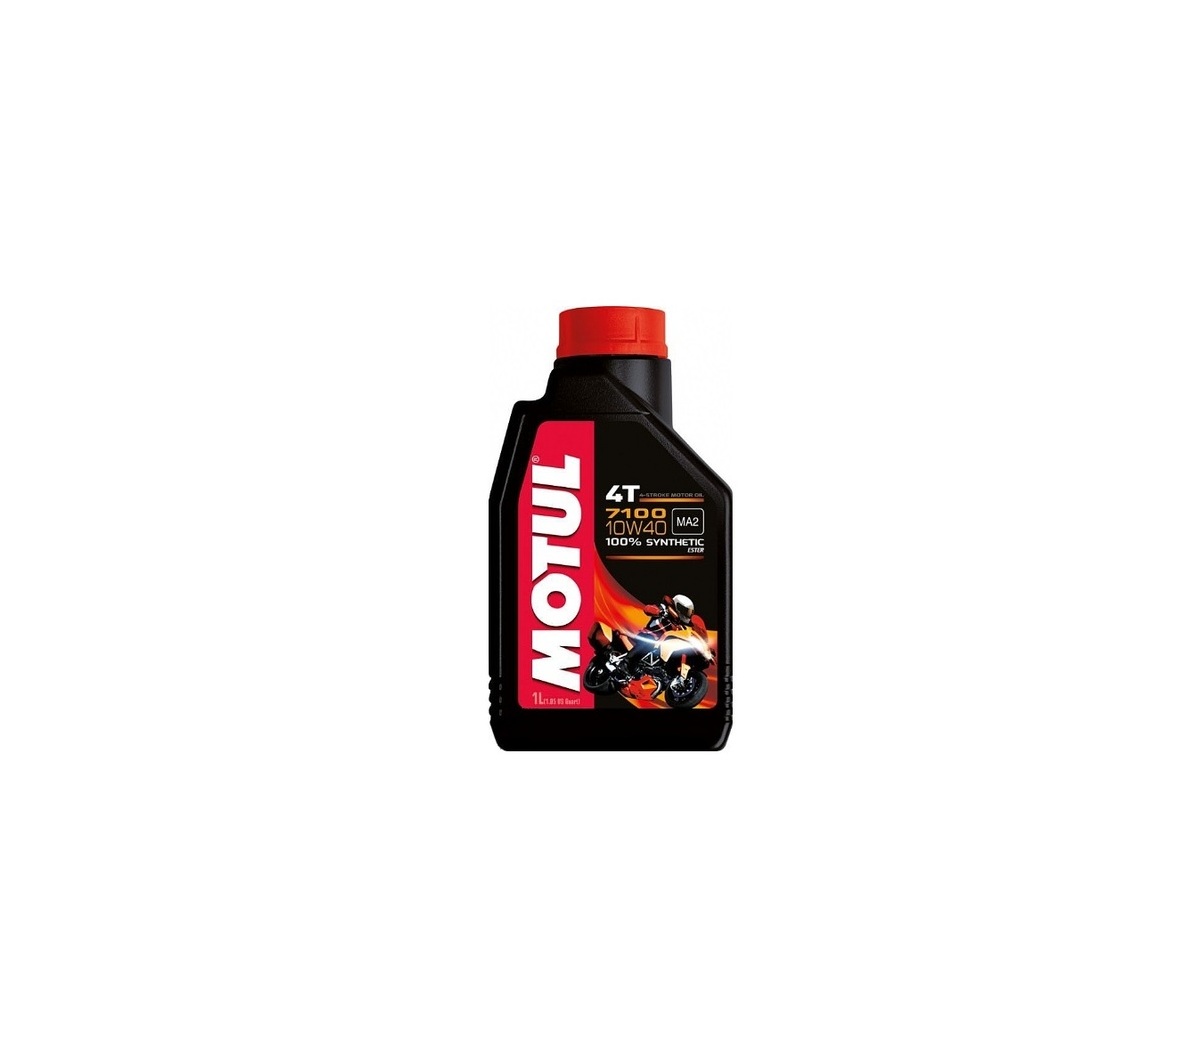 <span style="font-weight: bold;">Масло моторное MOTUL 7100 10W-40 4Т, 4 л.</span>&nbsp;